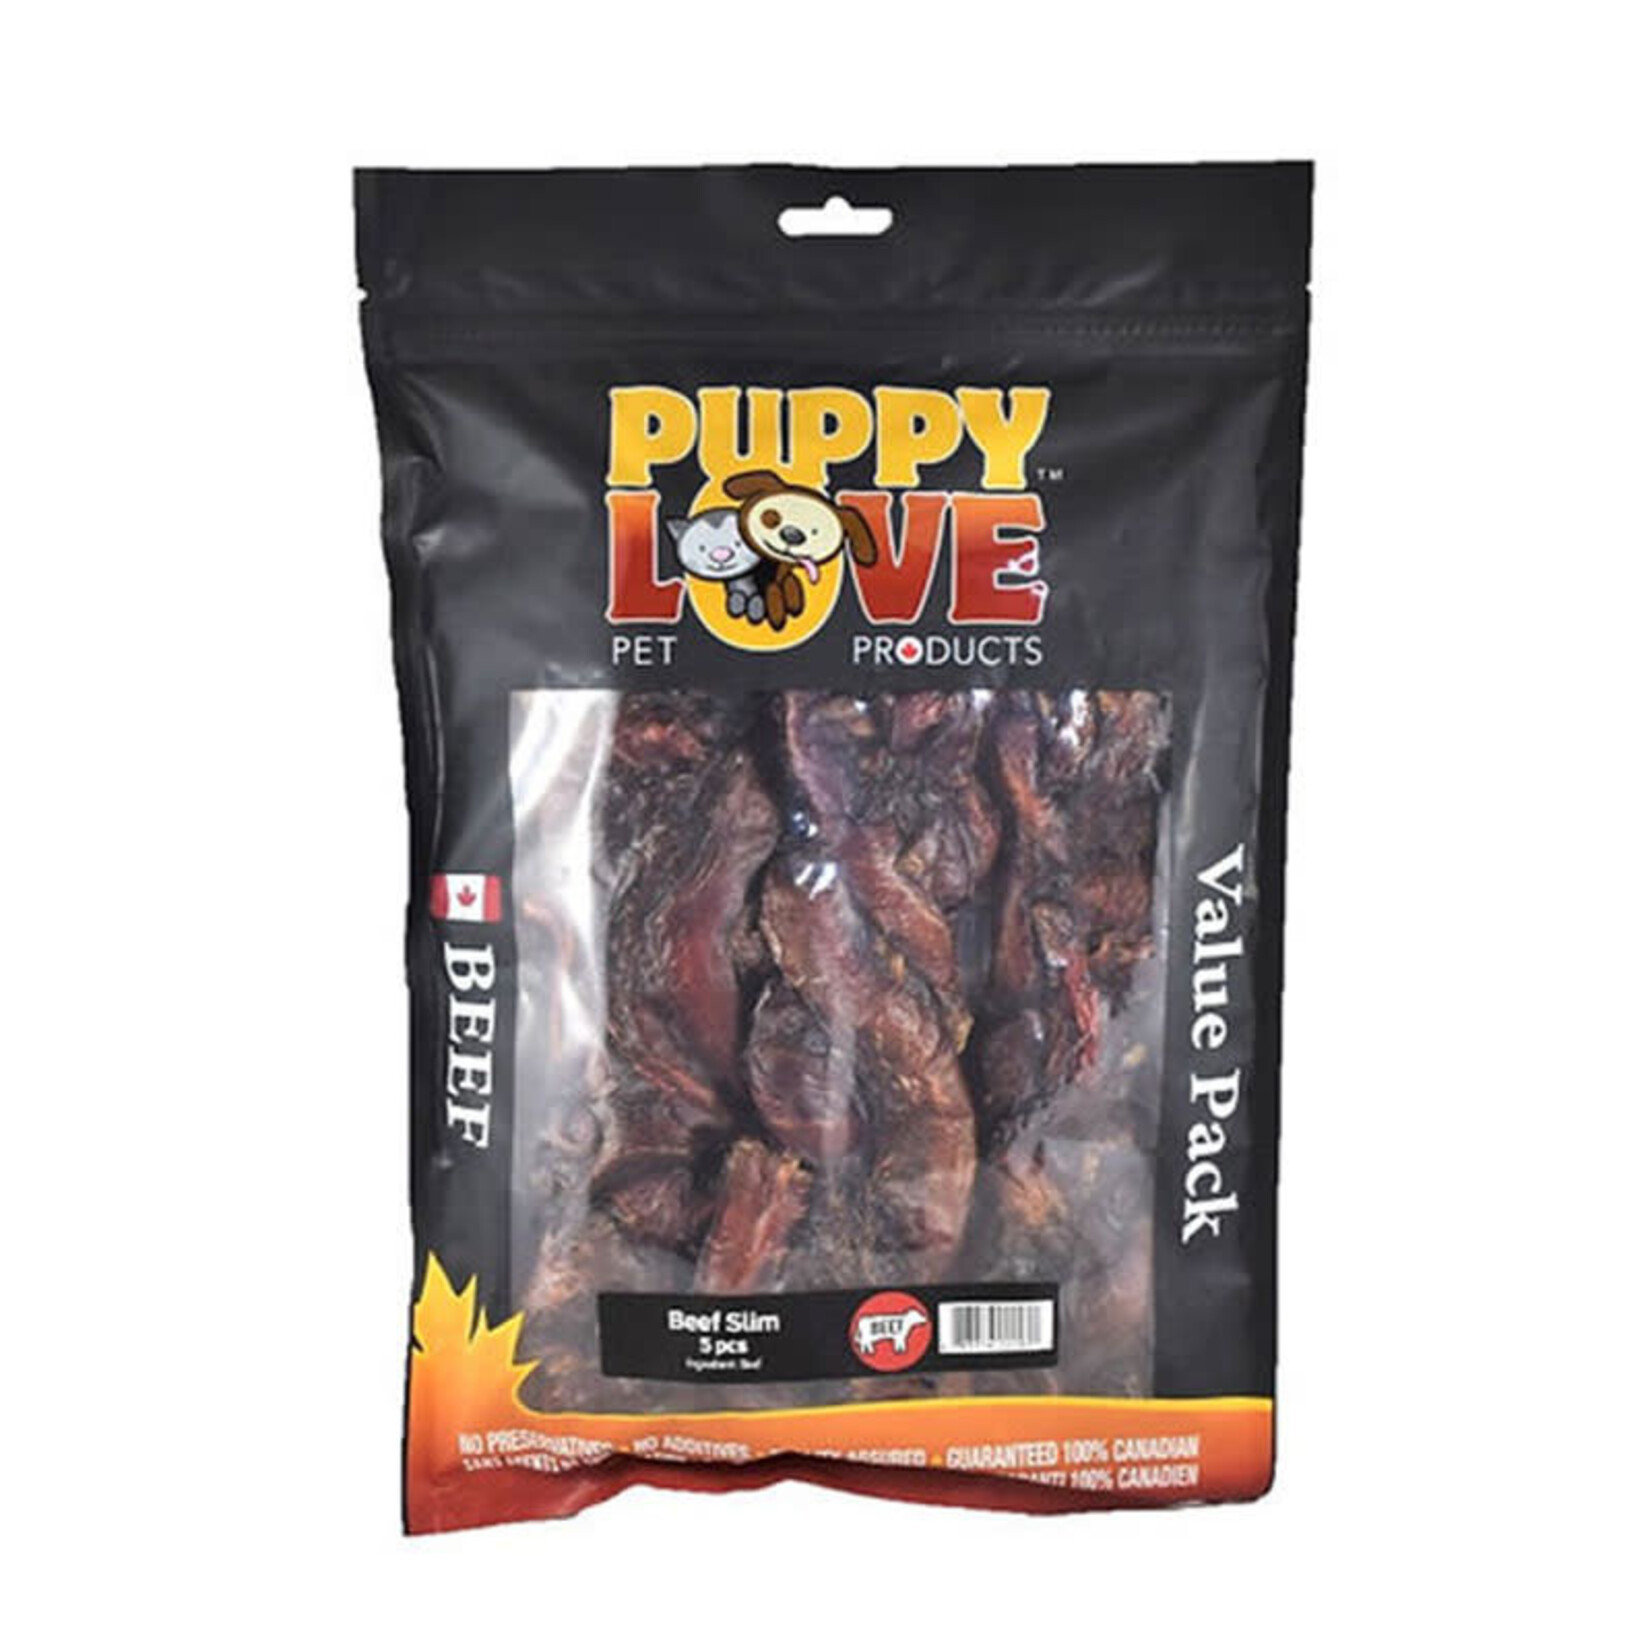 Puppy Love Pet Products Puppy Love - Beef Slim - 5 pack